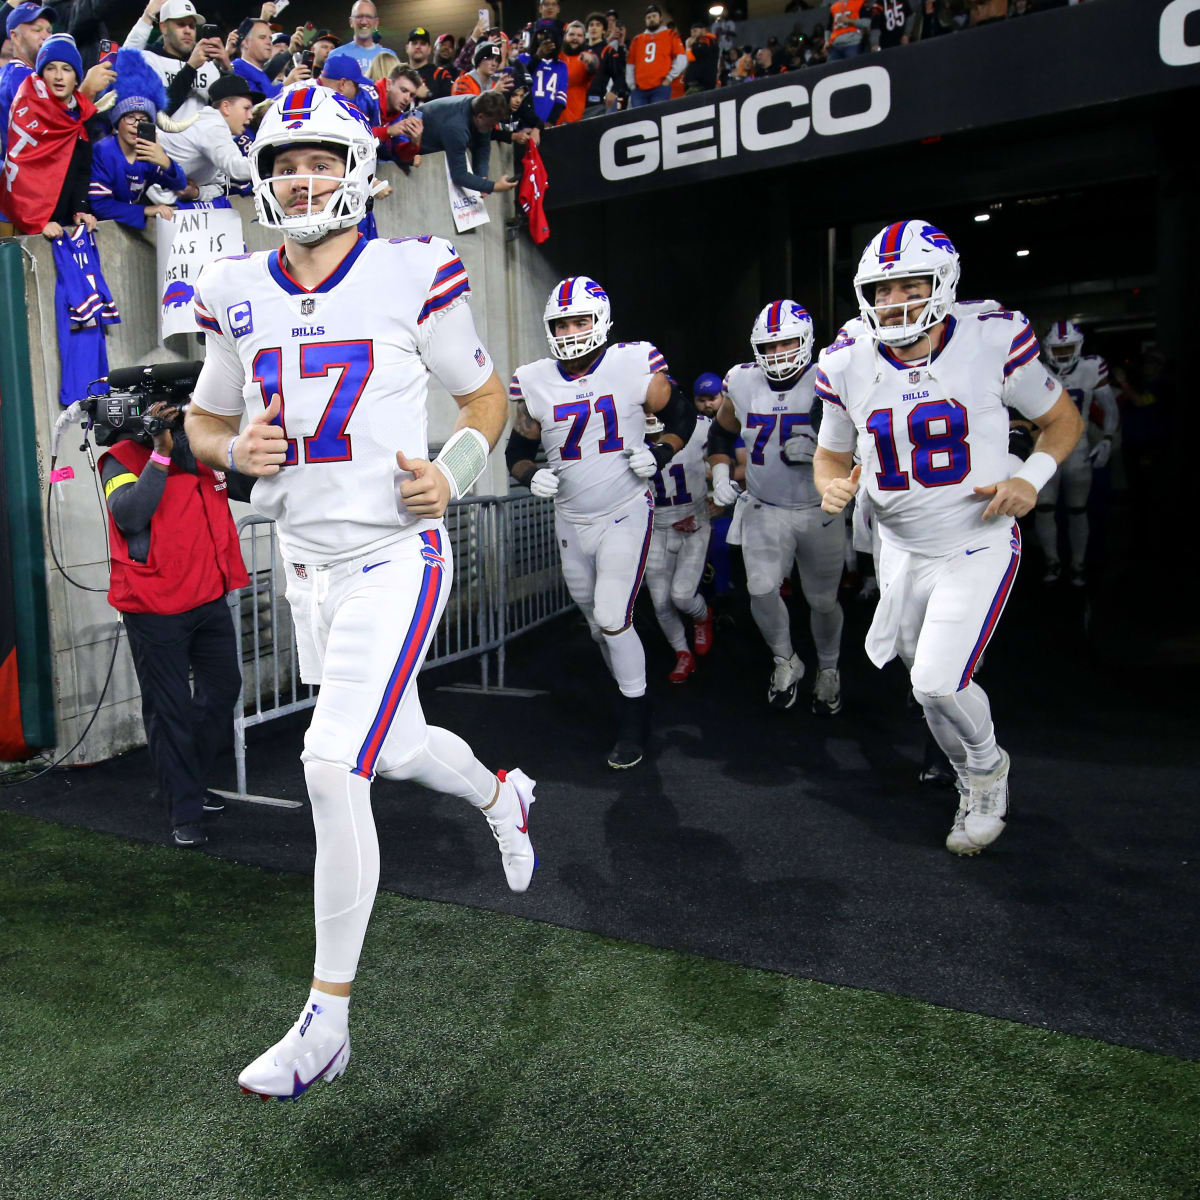 Buffalo Bills vs. Miami Dolphins: Time, date, TV channel for playoffs